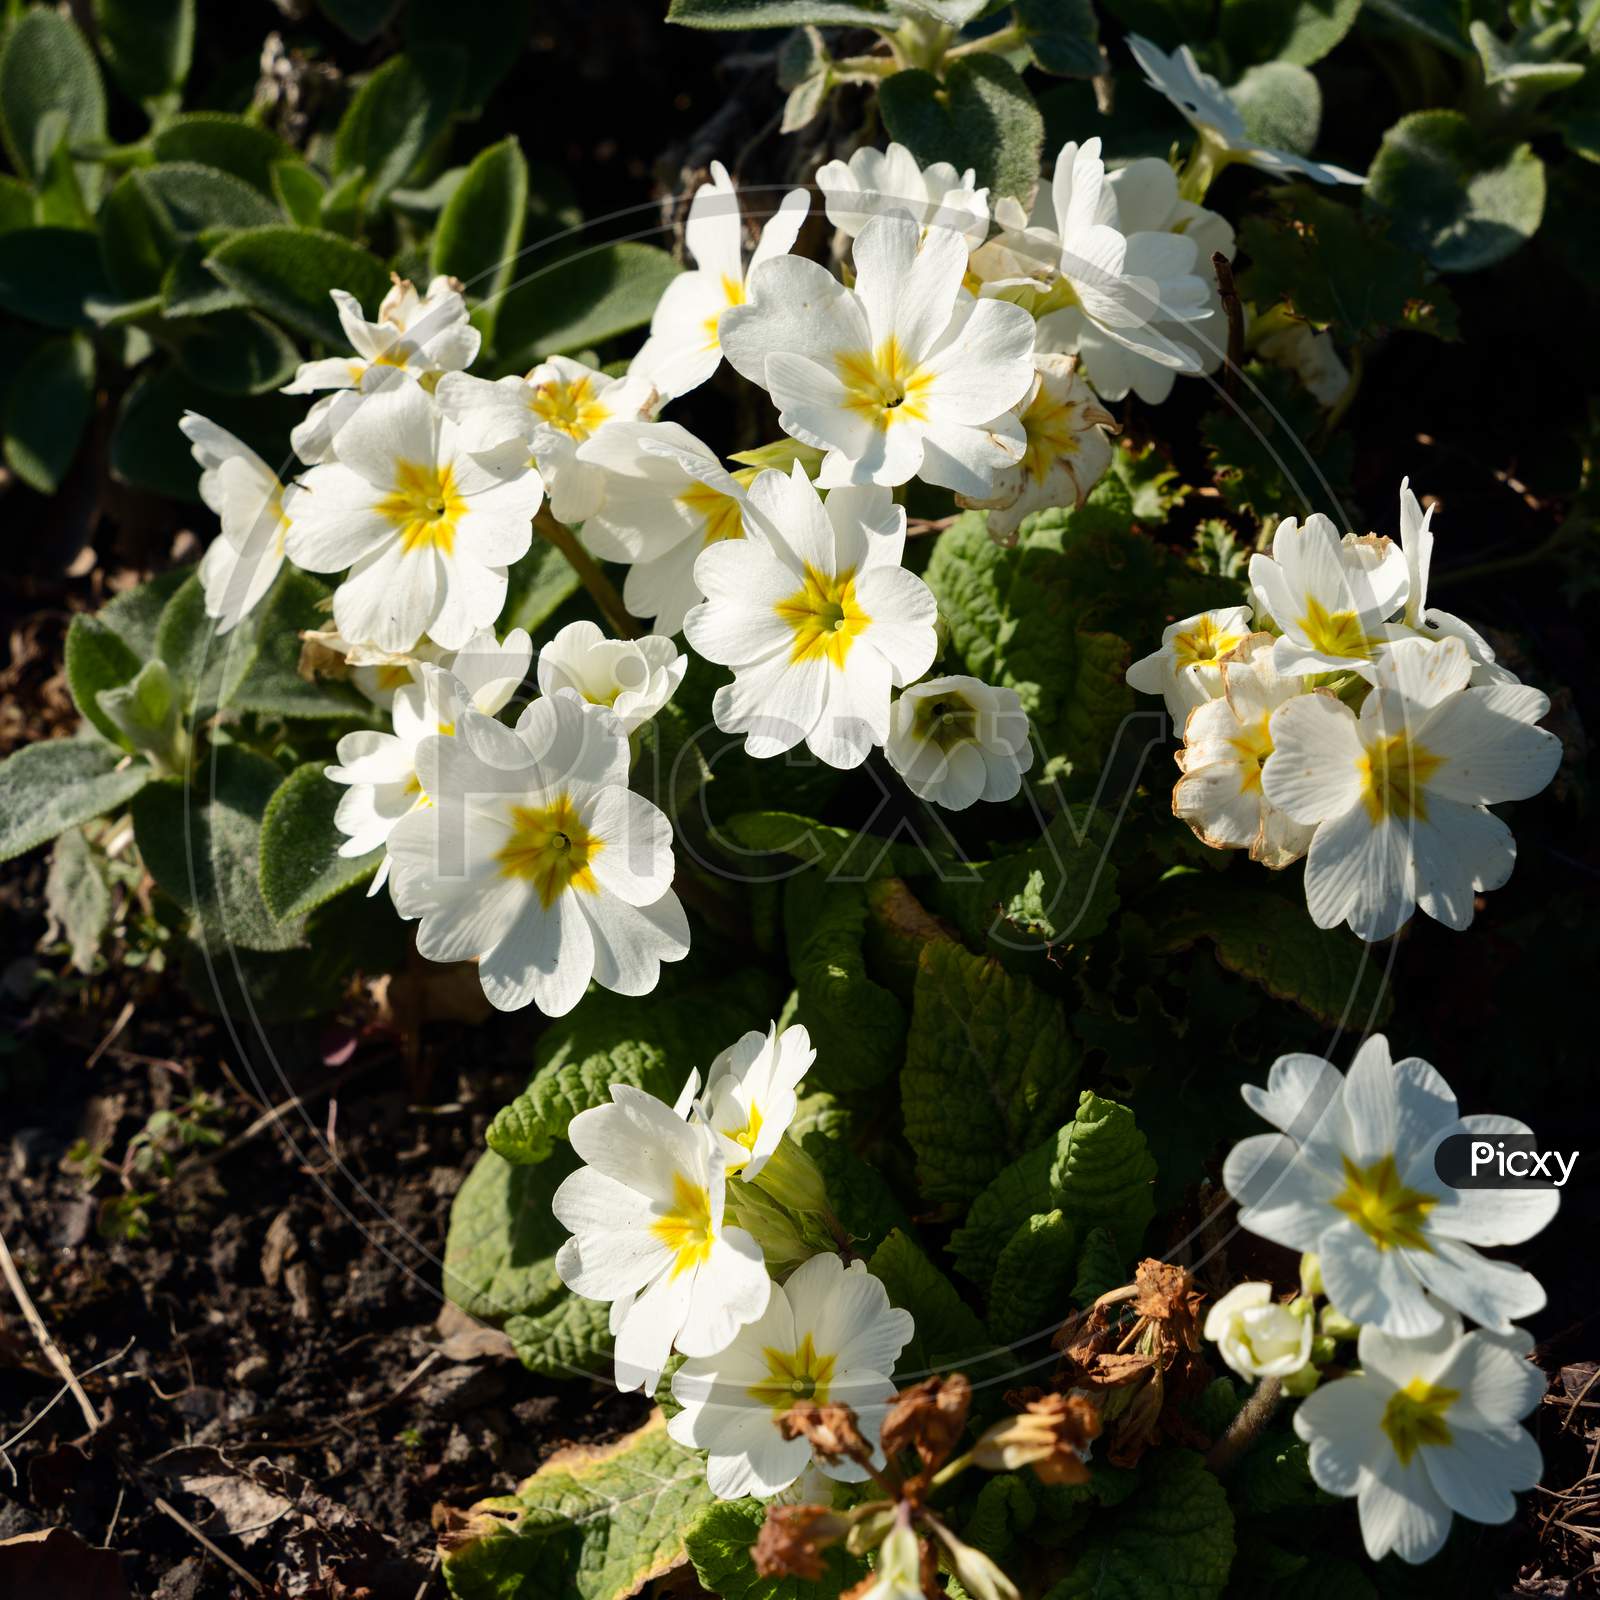 A Group Of Yellow Primroses Flowering In The Spring Sunshine